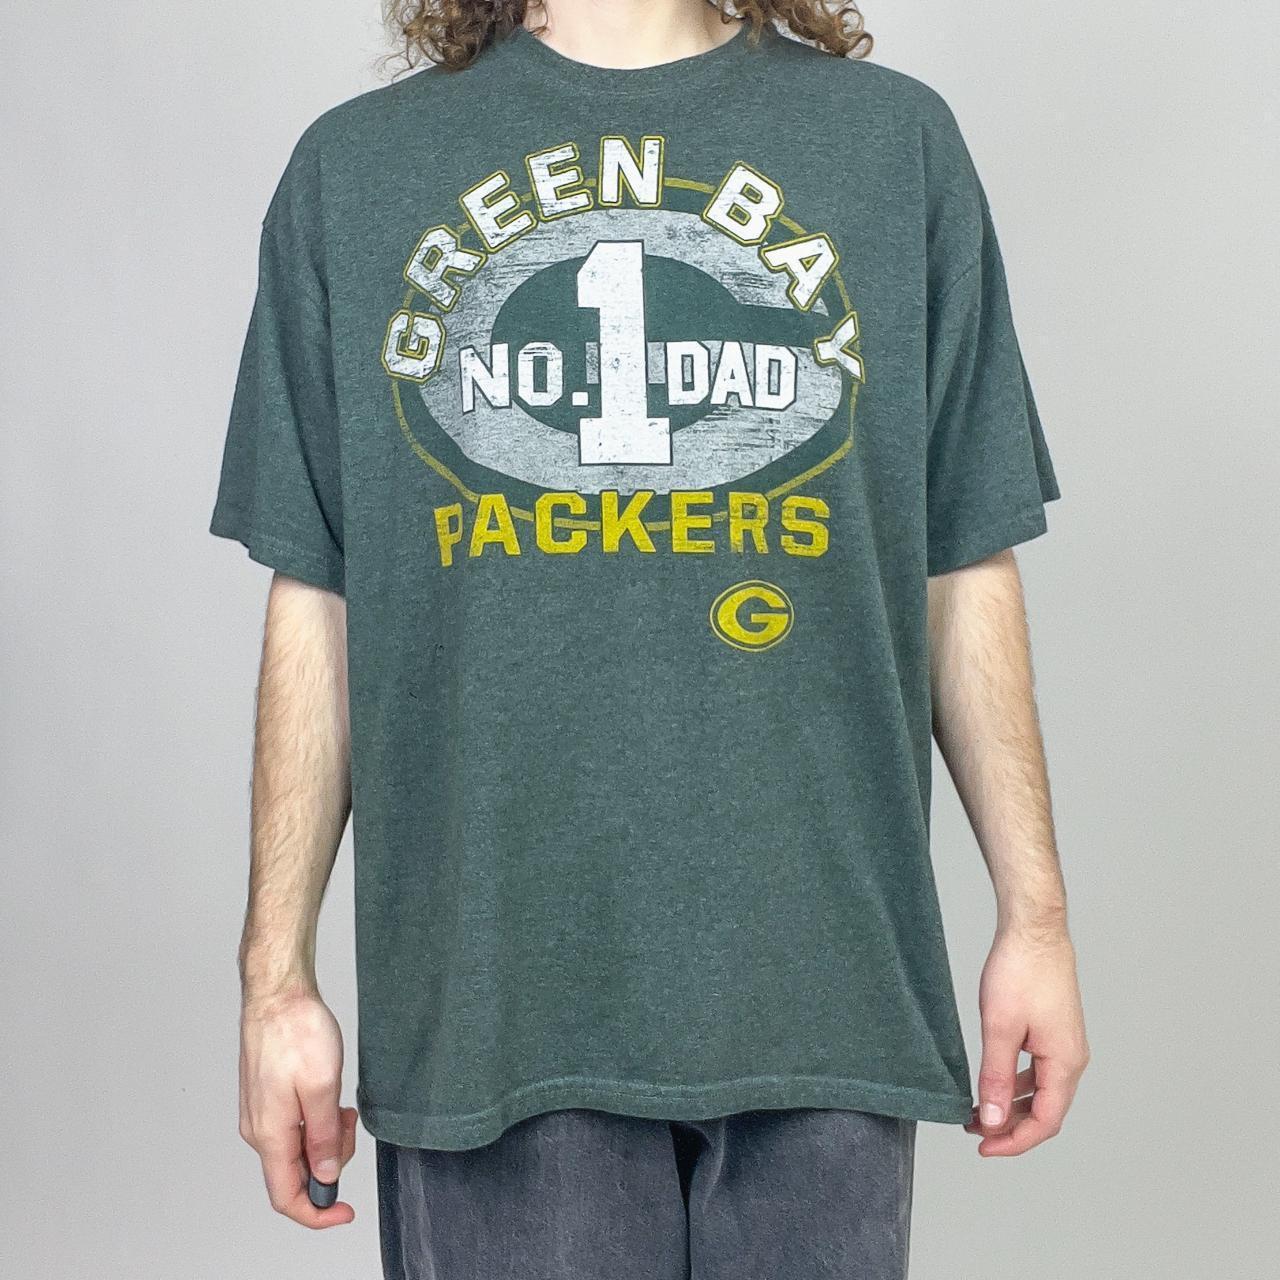 Green Bay Packers T-Shirt “Number 1 Dad”, relaxed - Depop